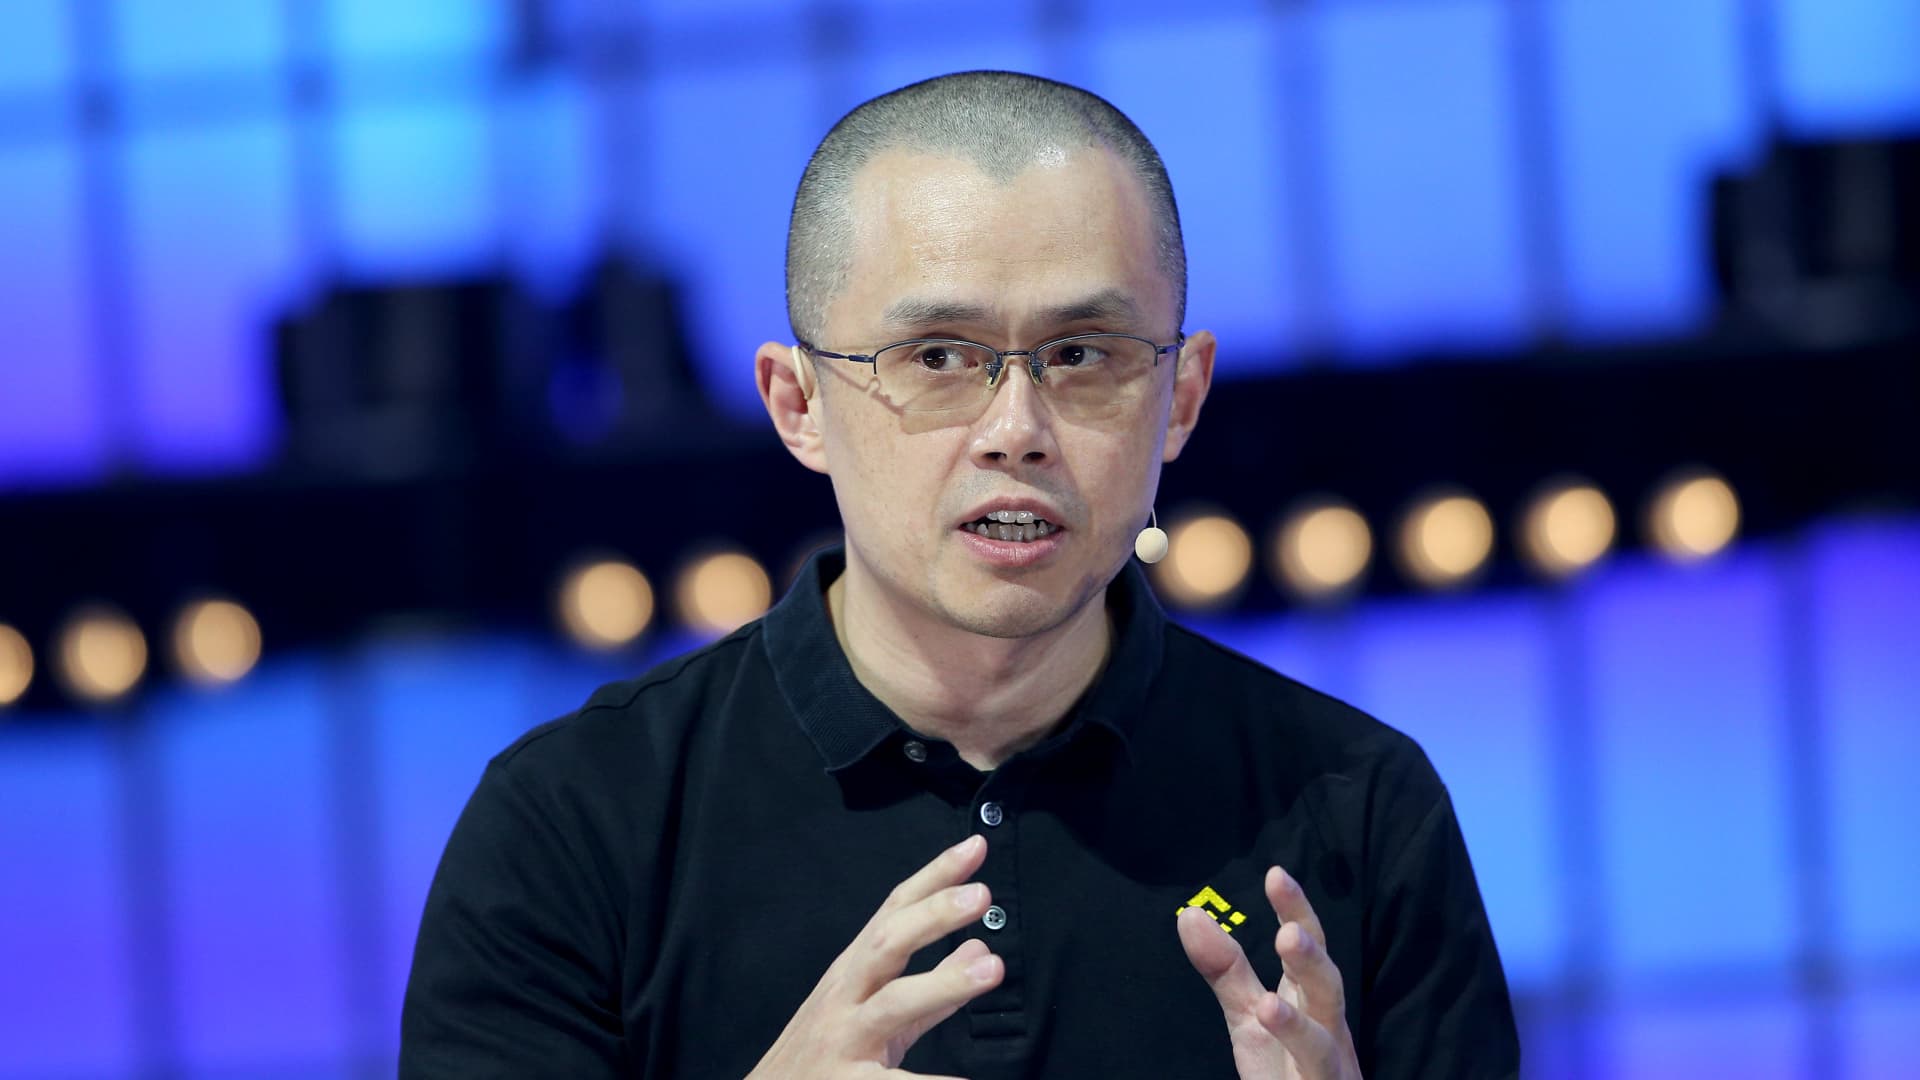 No ‘immediate path forward’: CFTC is talking to Binance after launching legal action, official says